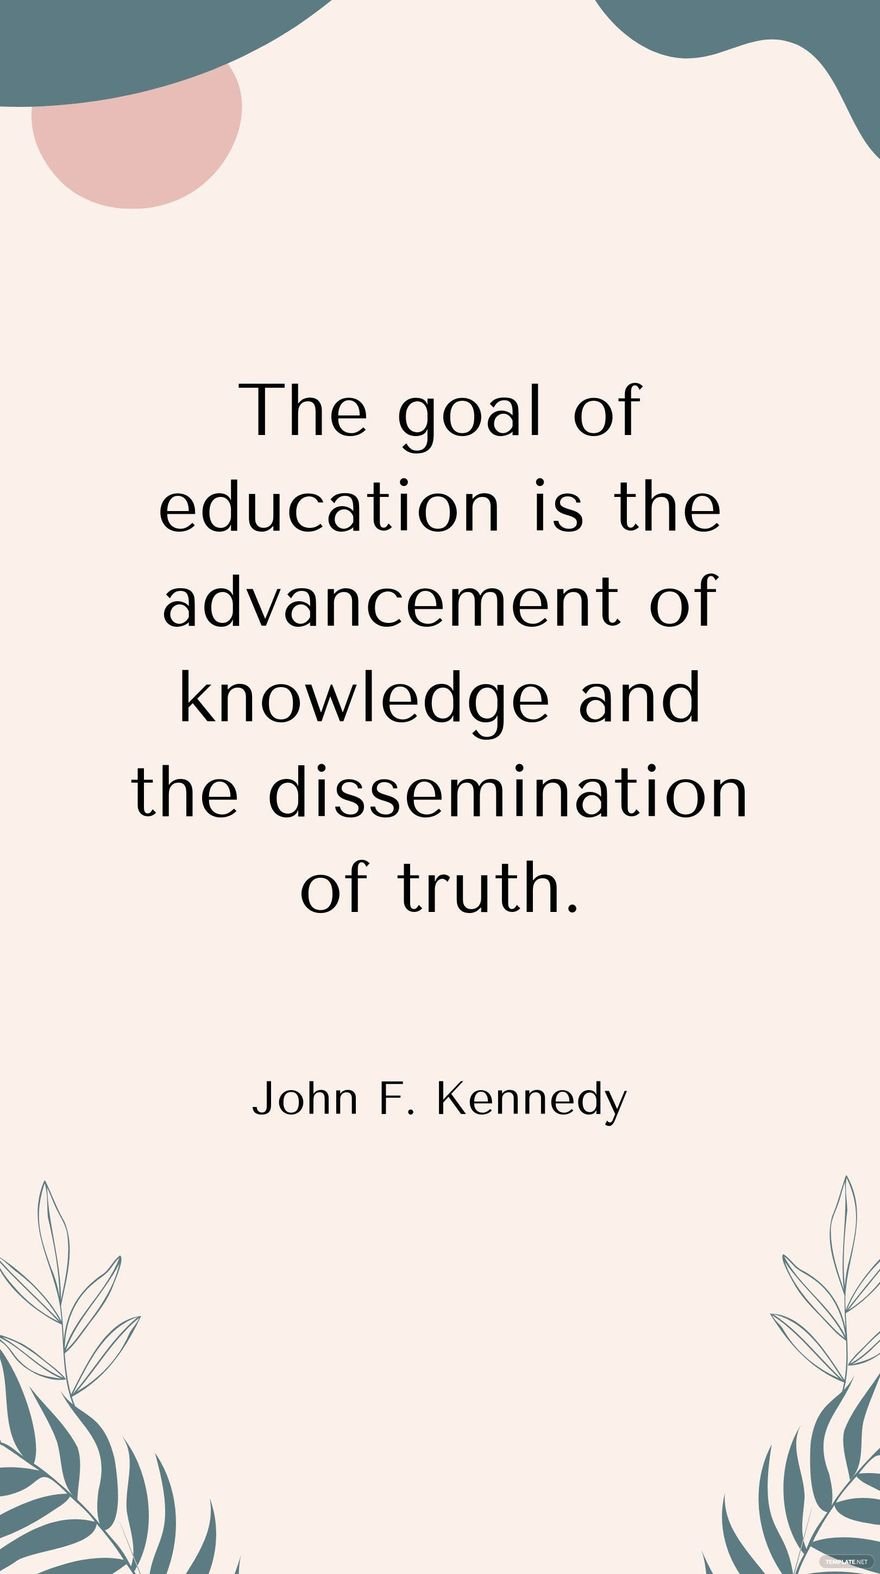 John F. Kennedy - The goal of education is the advancement of knowledge and the dissemination of truth.